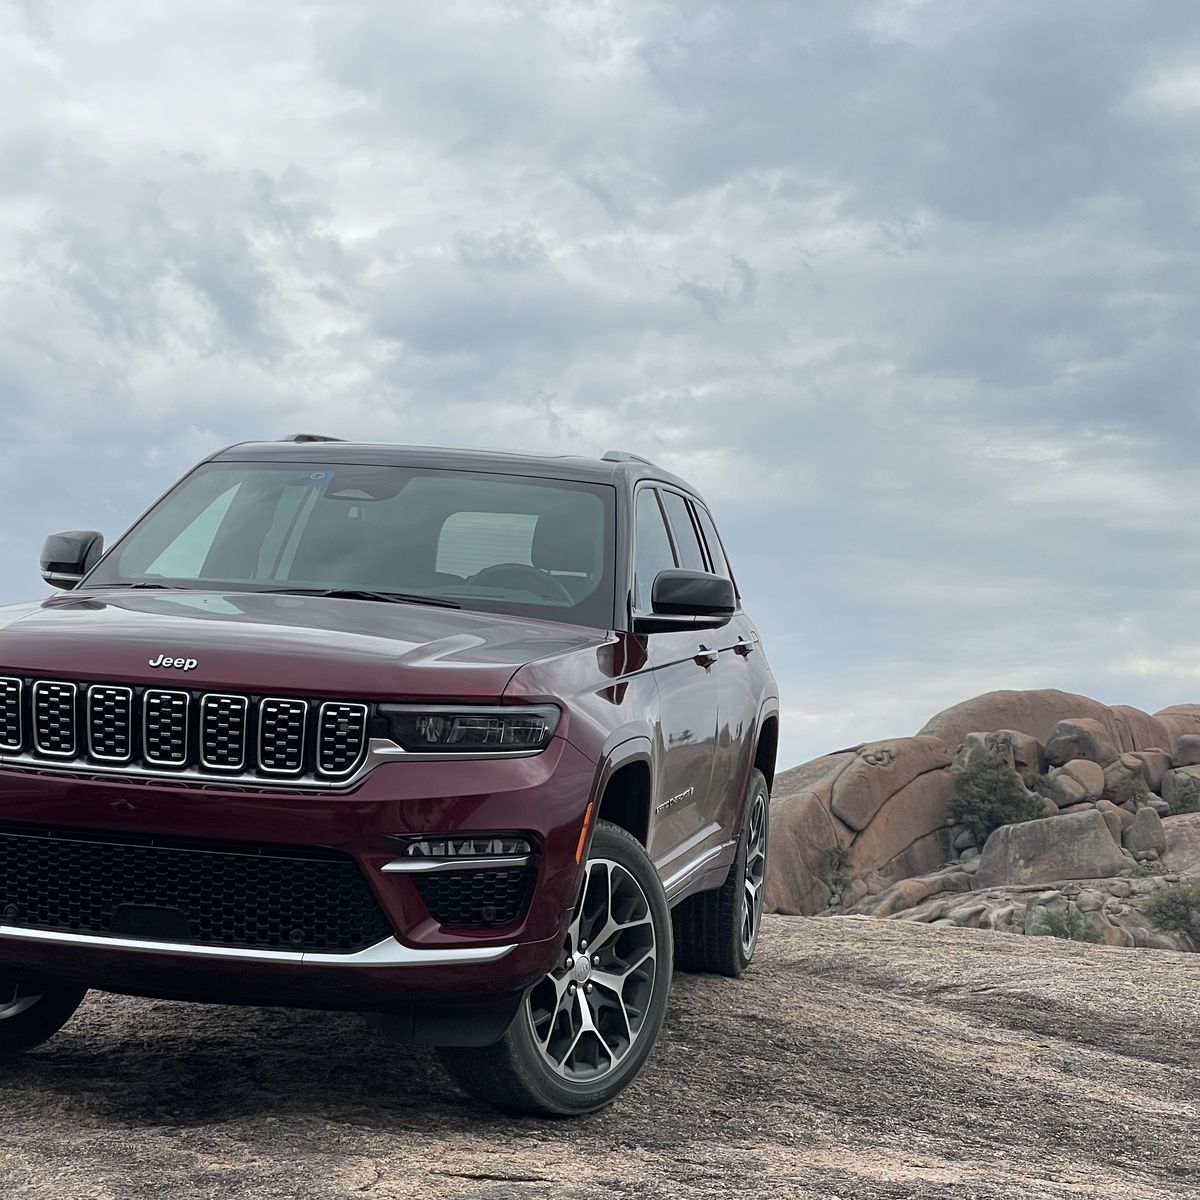 Onderdompeling Oeps dier 2022 Jeep Grand Cherokee 4xe Review: The Plug-In Hybrid SUV You've Been  Waiting For